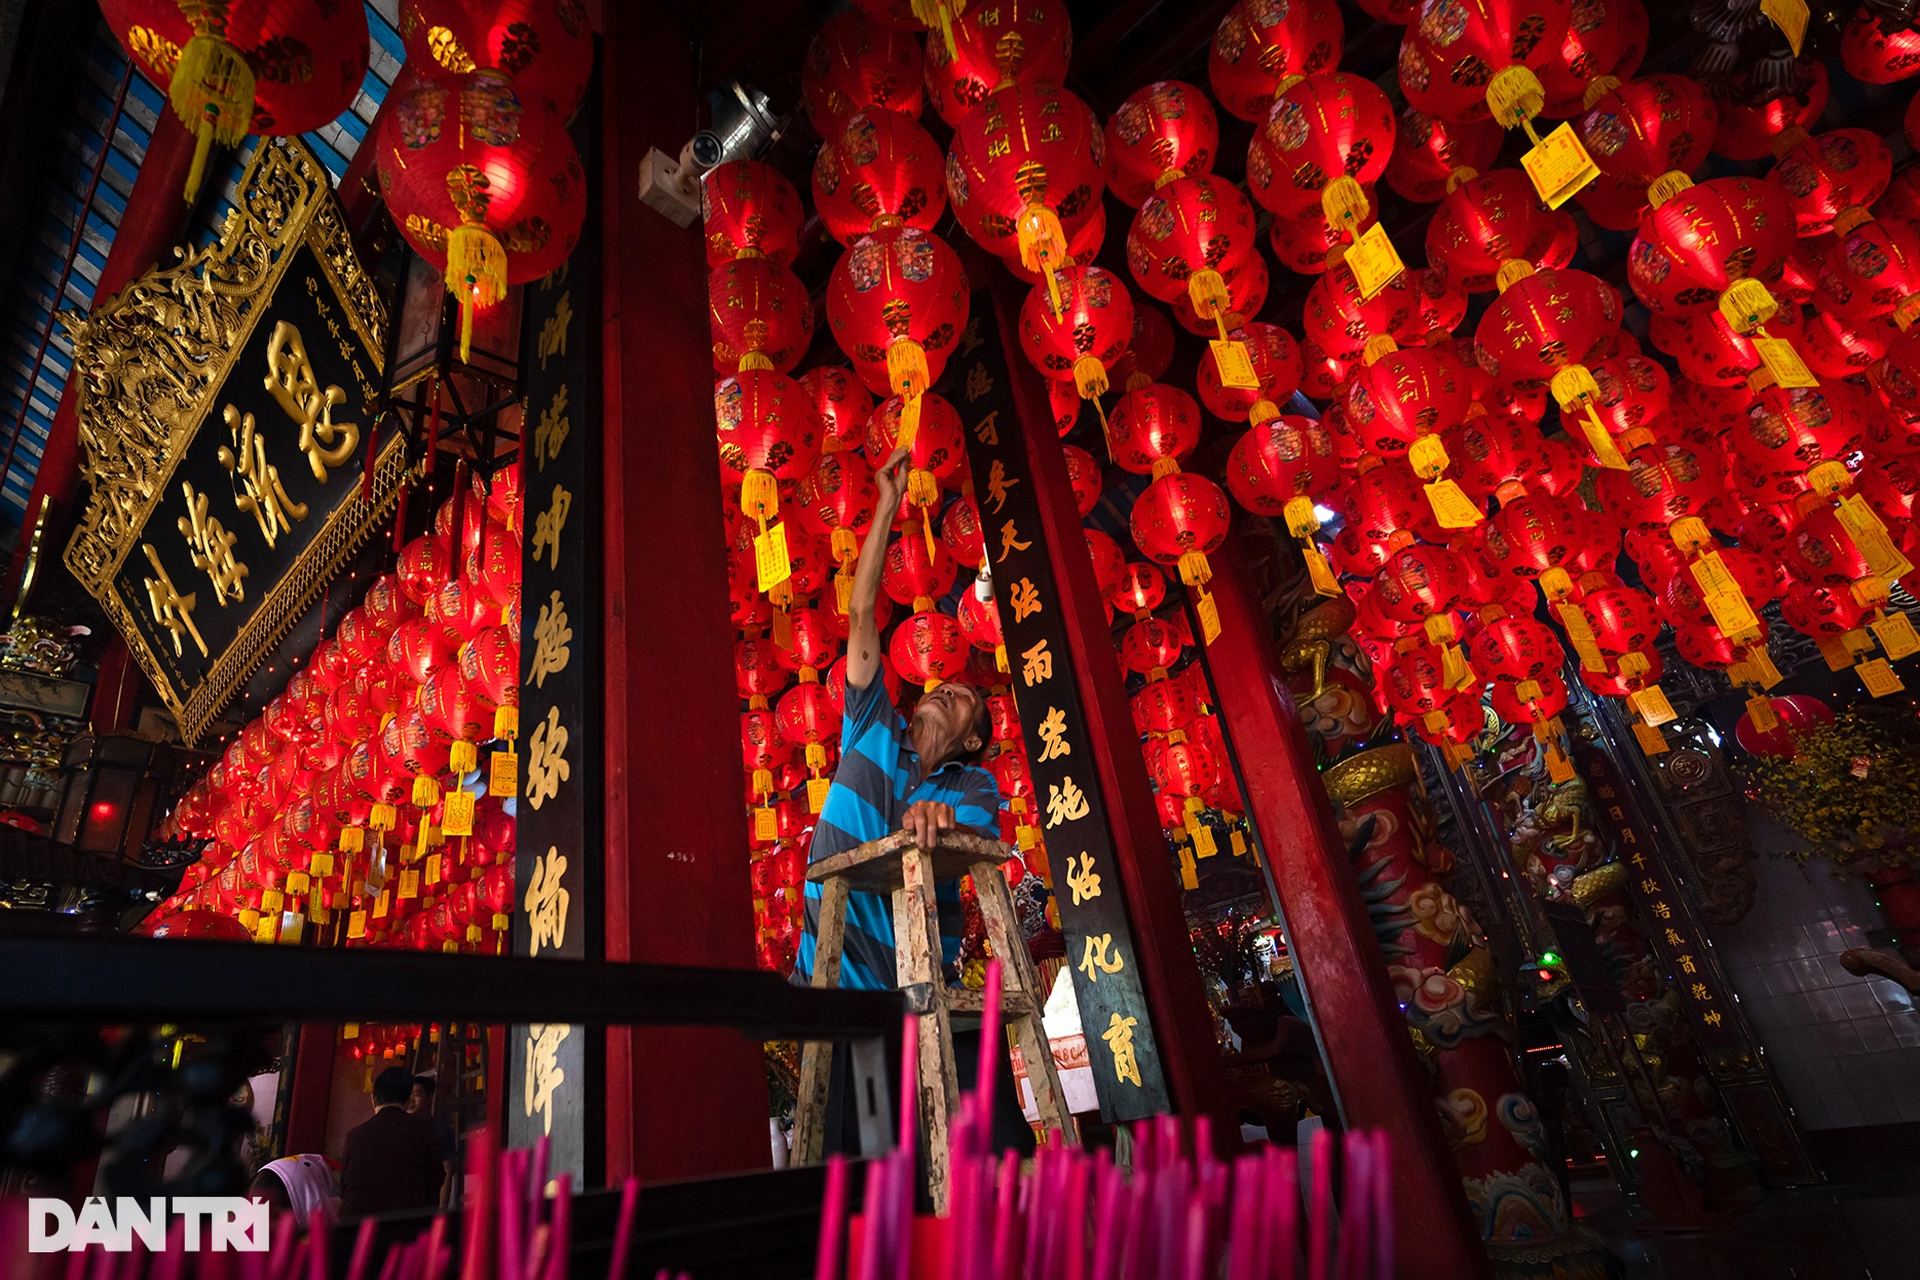 Hundreds of bright red lanterns inside the famous Soc Trang temple - 8